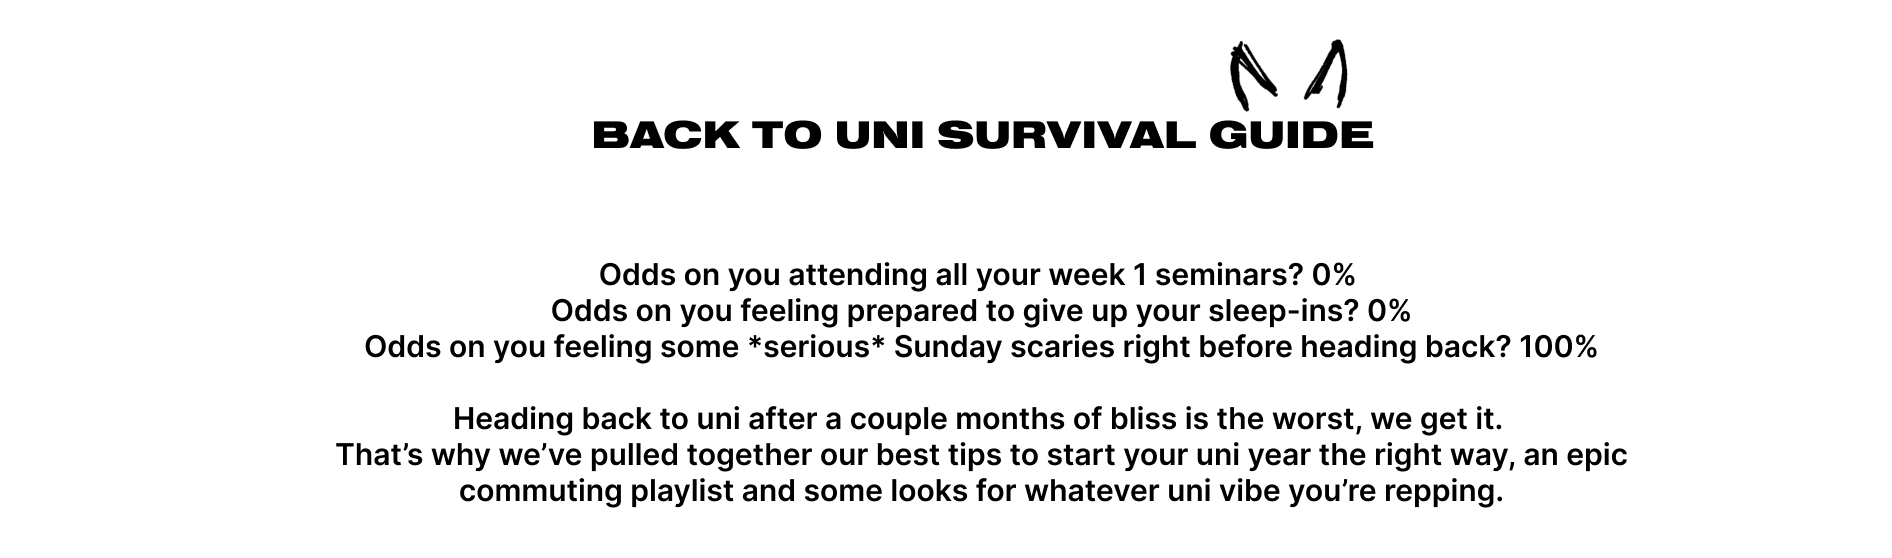 Back to uni survival guide!